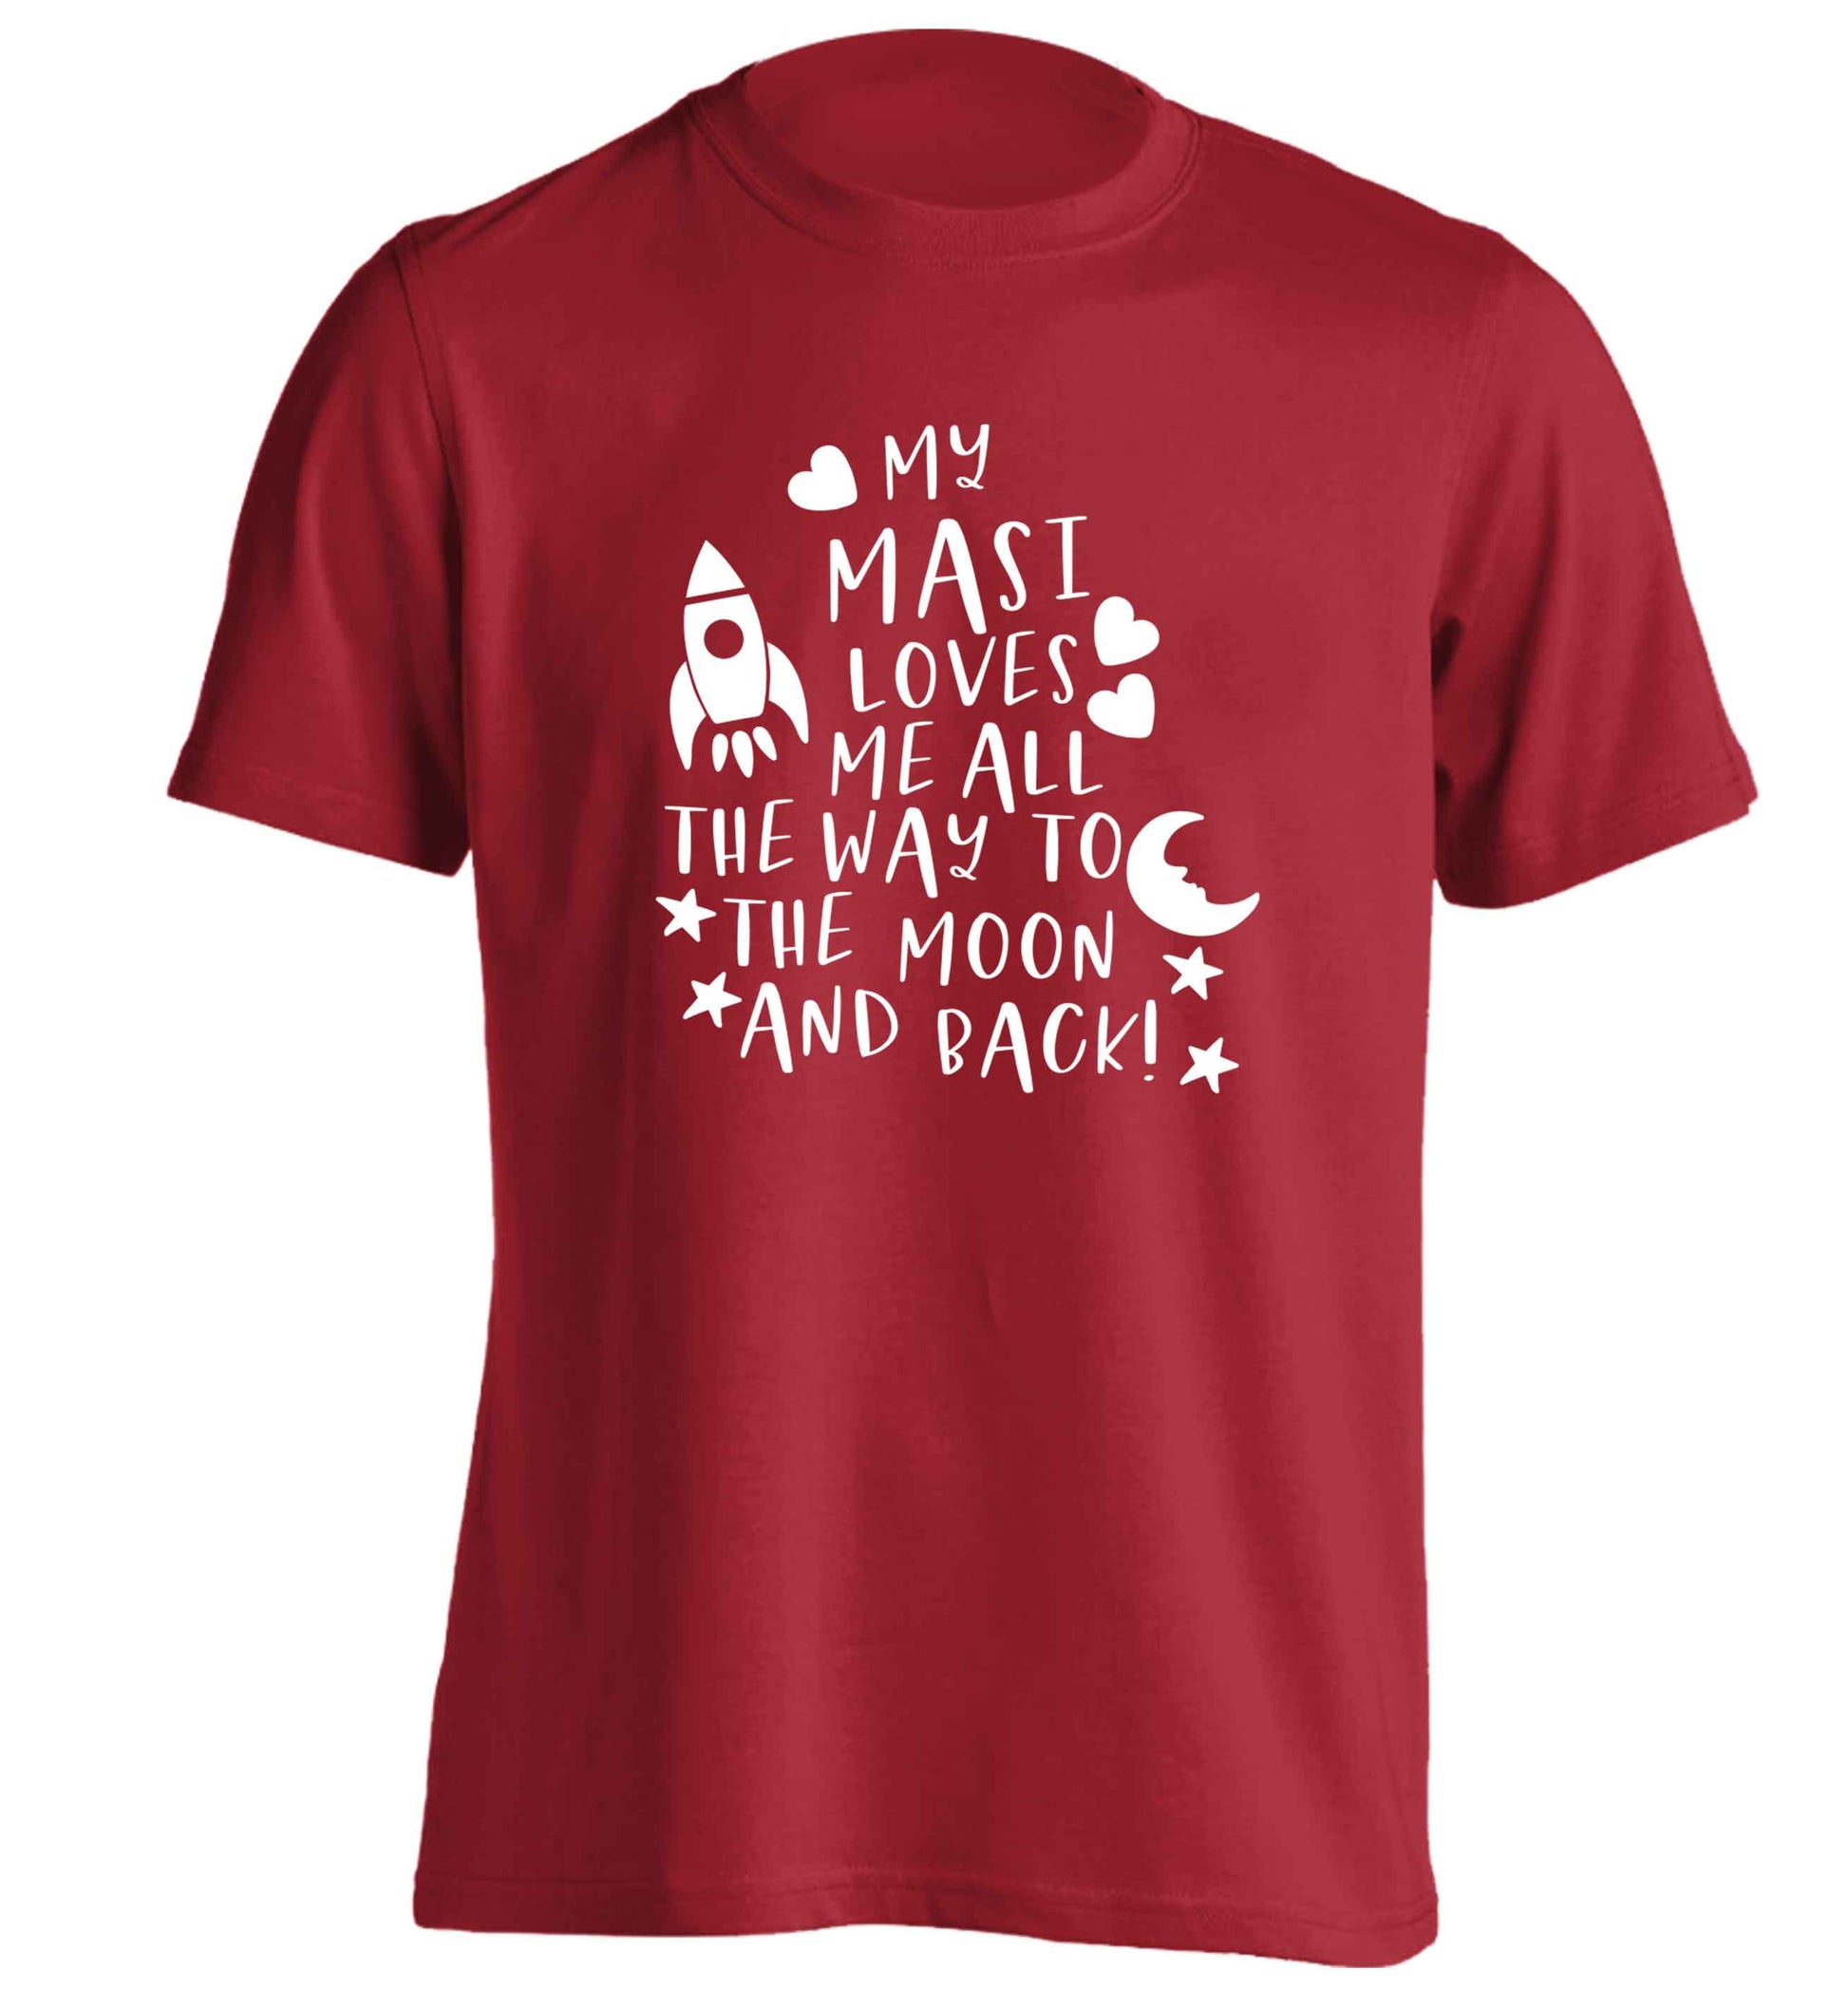 My masi loves me all the way to the moon and back adults unisex red Tshirt 2XL